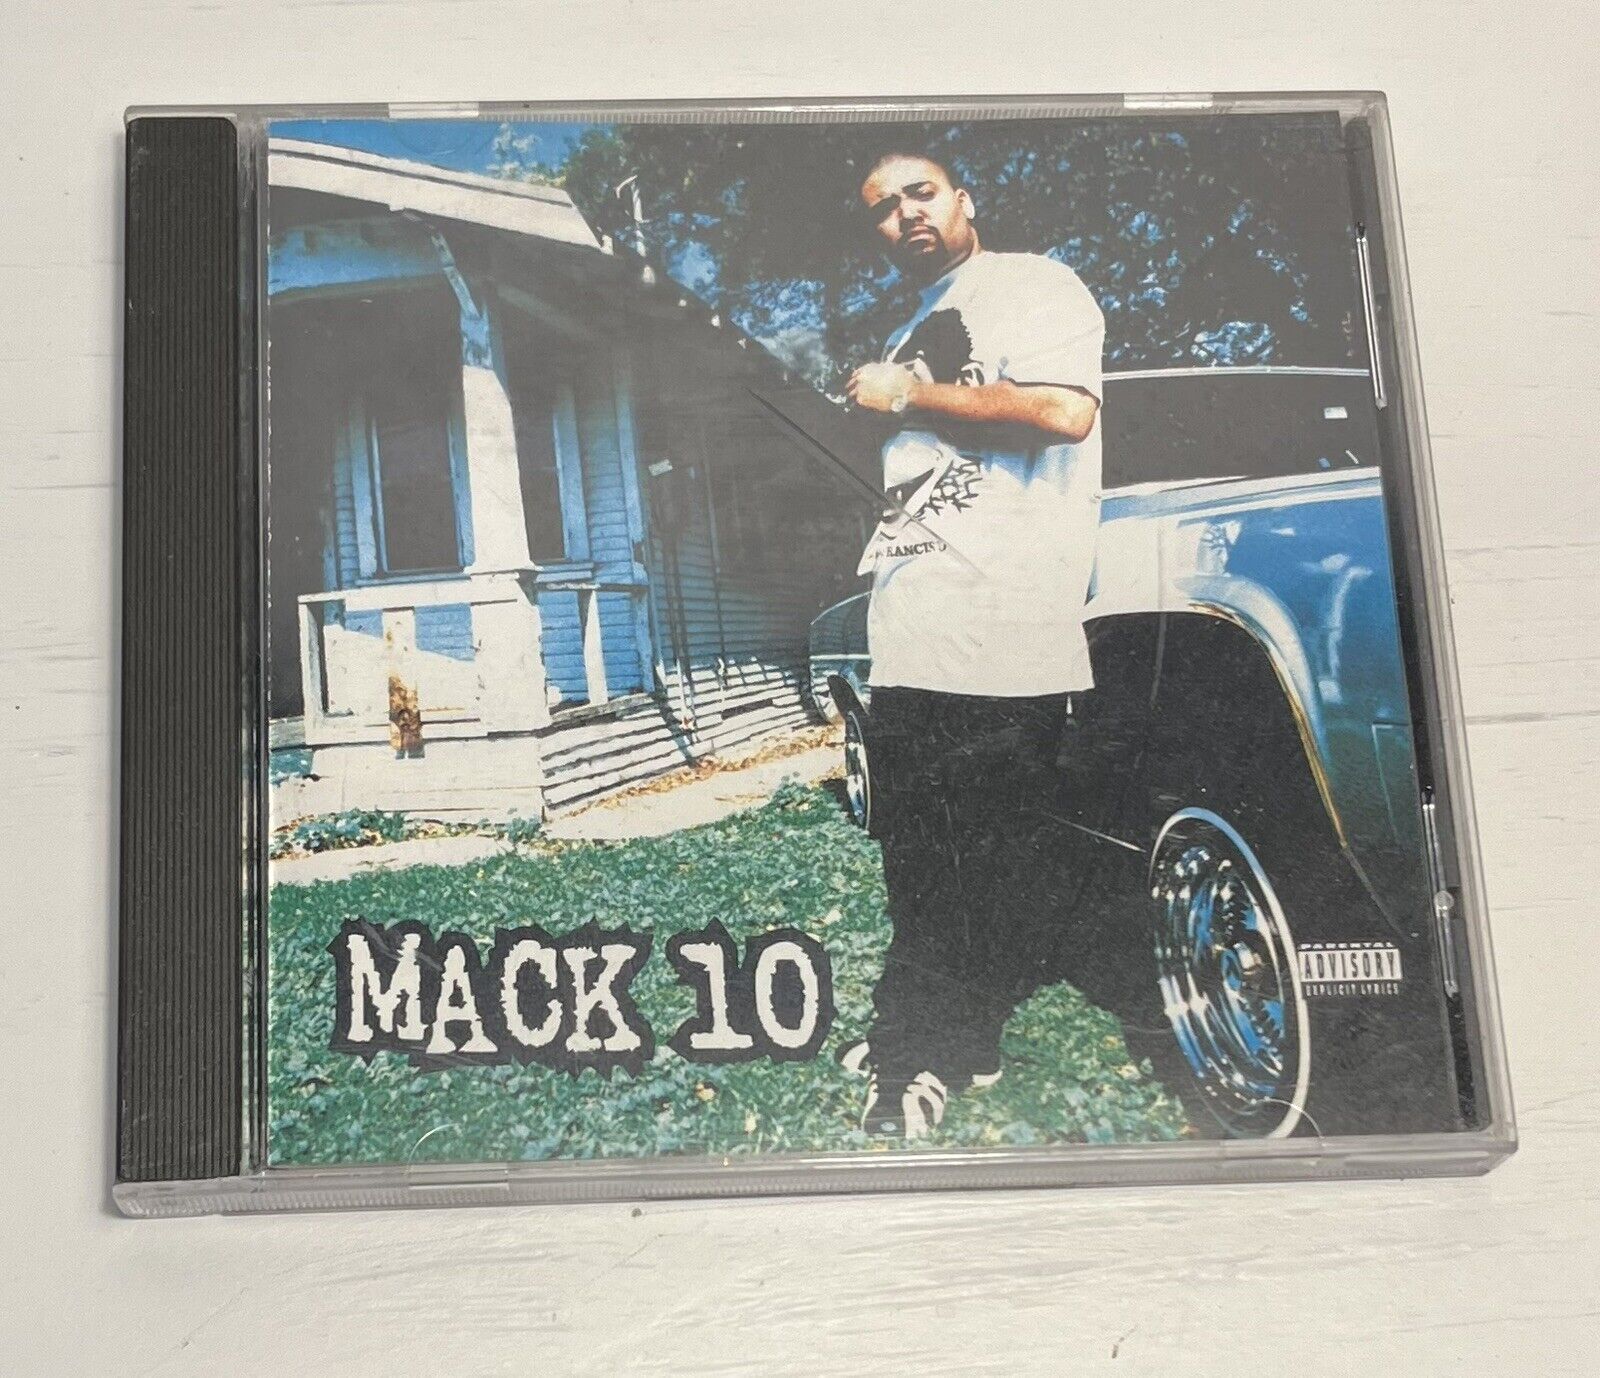 Mack 10 Self-Titled Debut CD 1995 Priority Records Westside Connection RARE